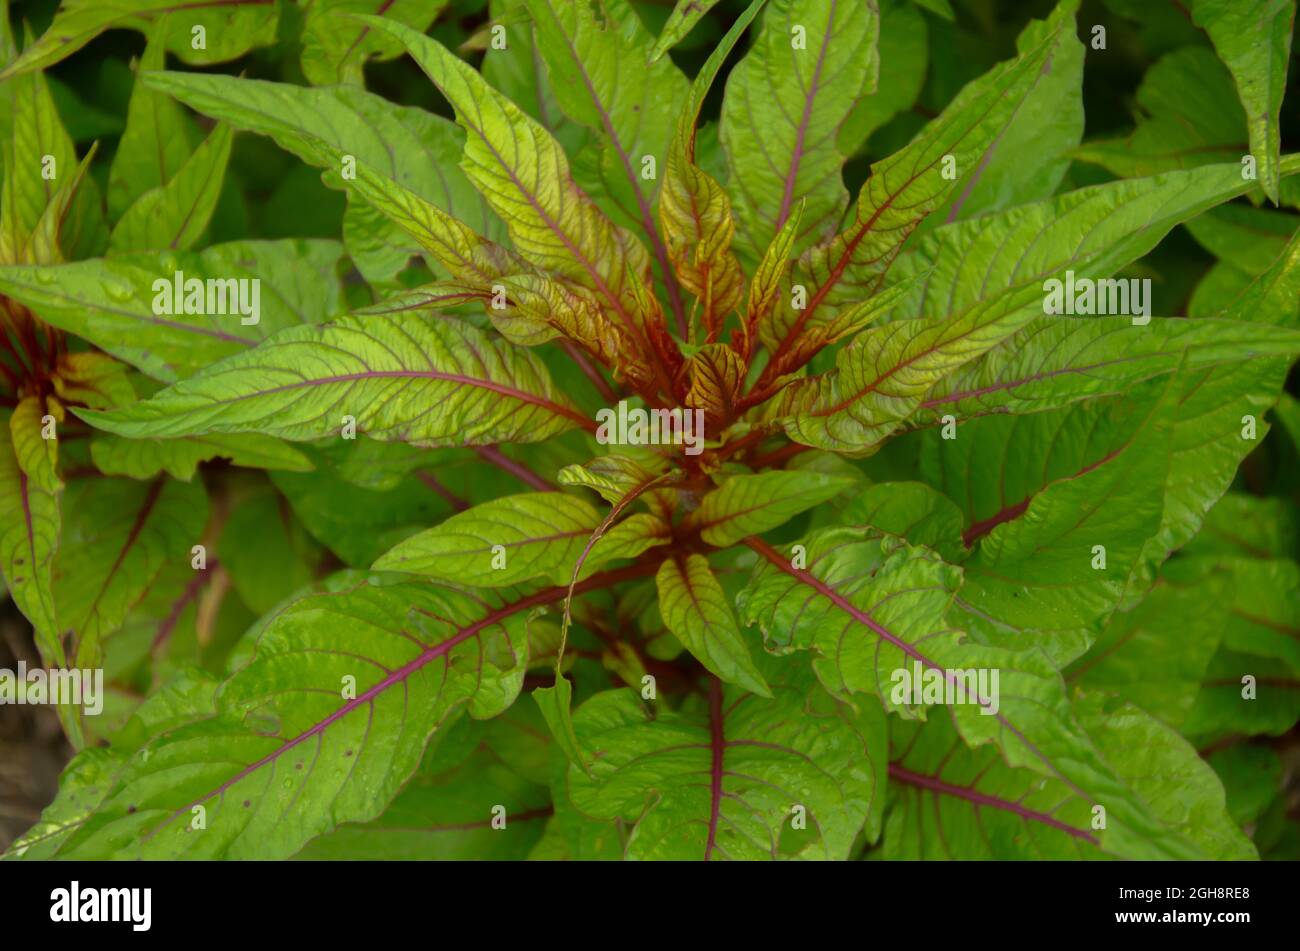 Selective focus on AMARANTHUS TRICOLOR plant with green leaves in the park in morning sun light. Stock Photo